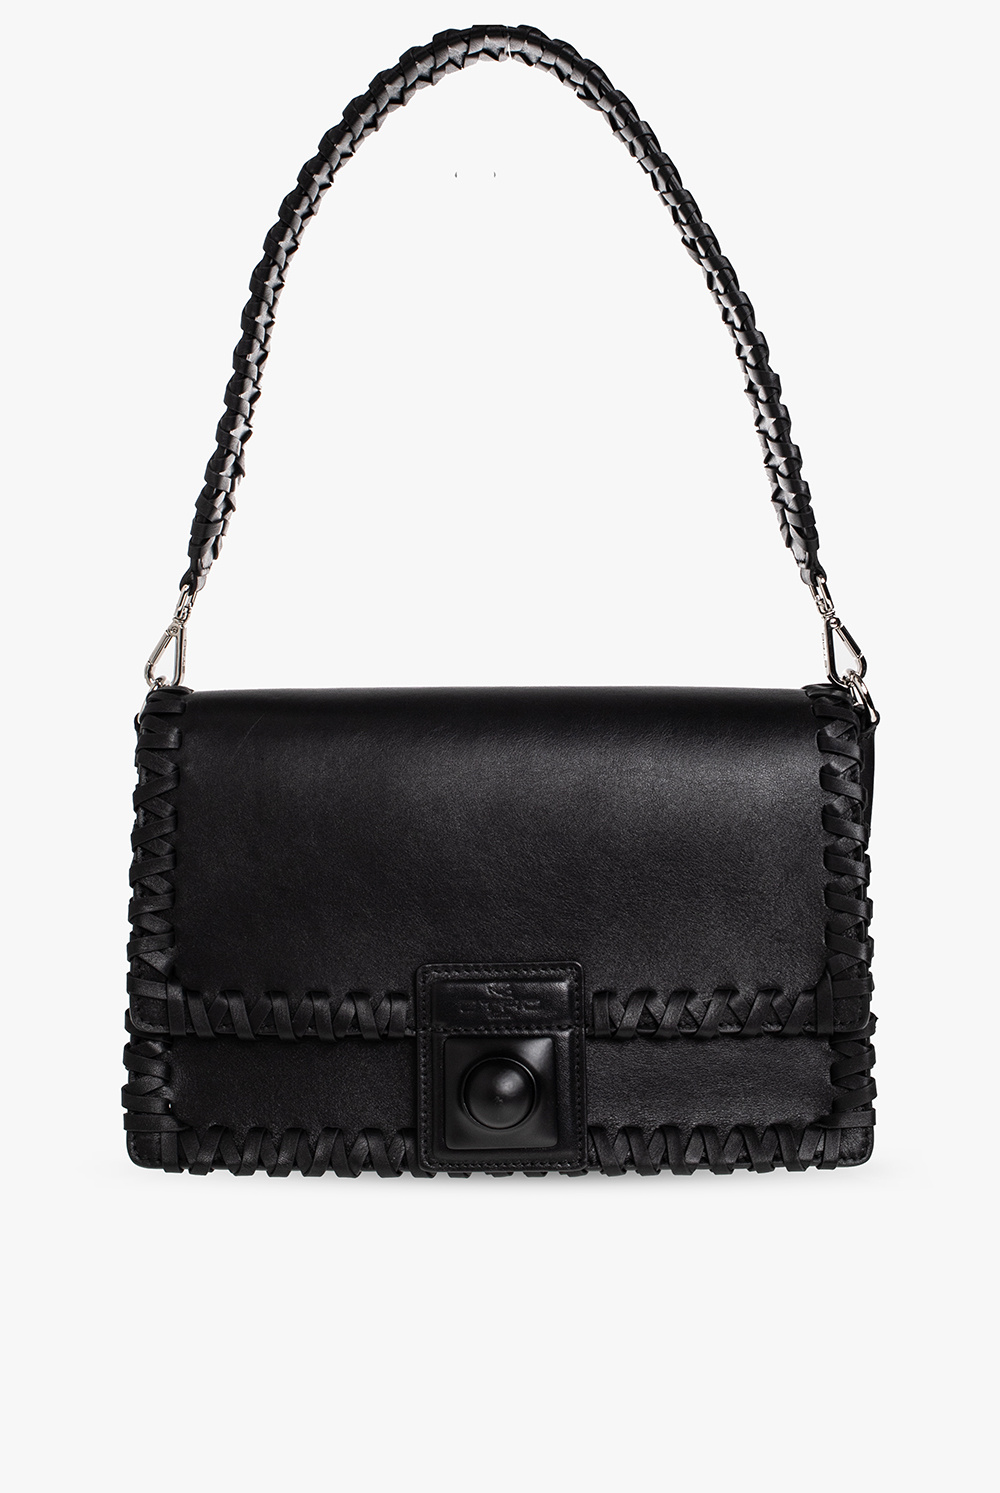 Etro Marc Jacobs Bag Accessories for Women